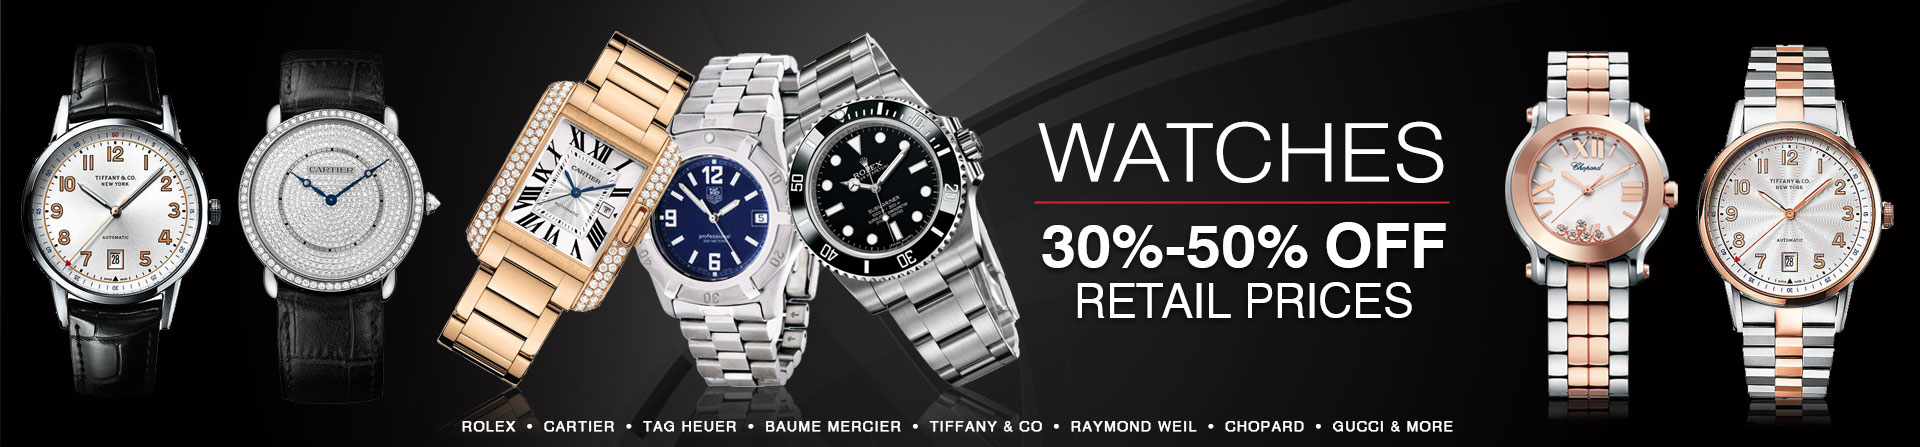 WATCHES 30% to 50% OFF RETAIL PRICE!